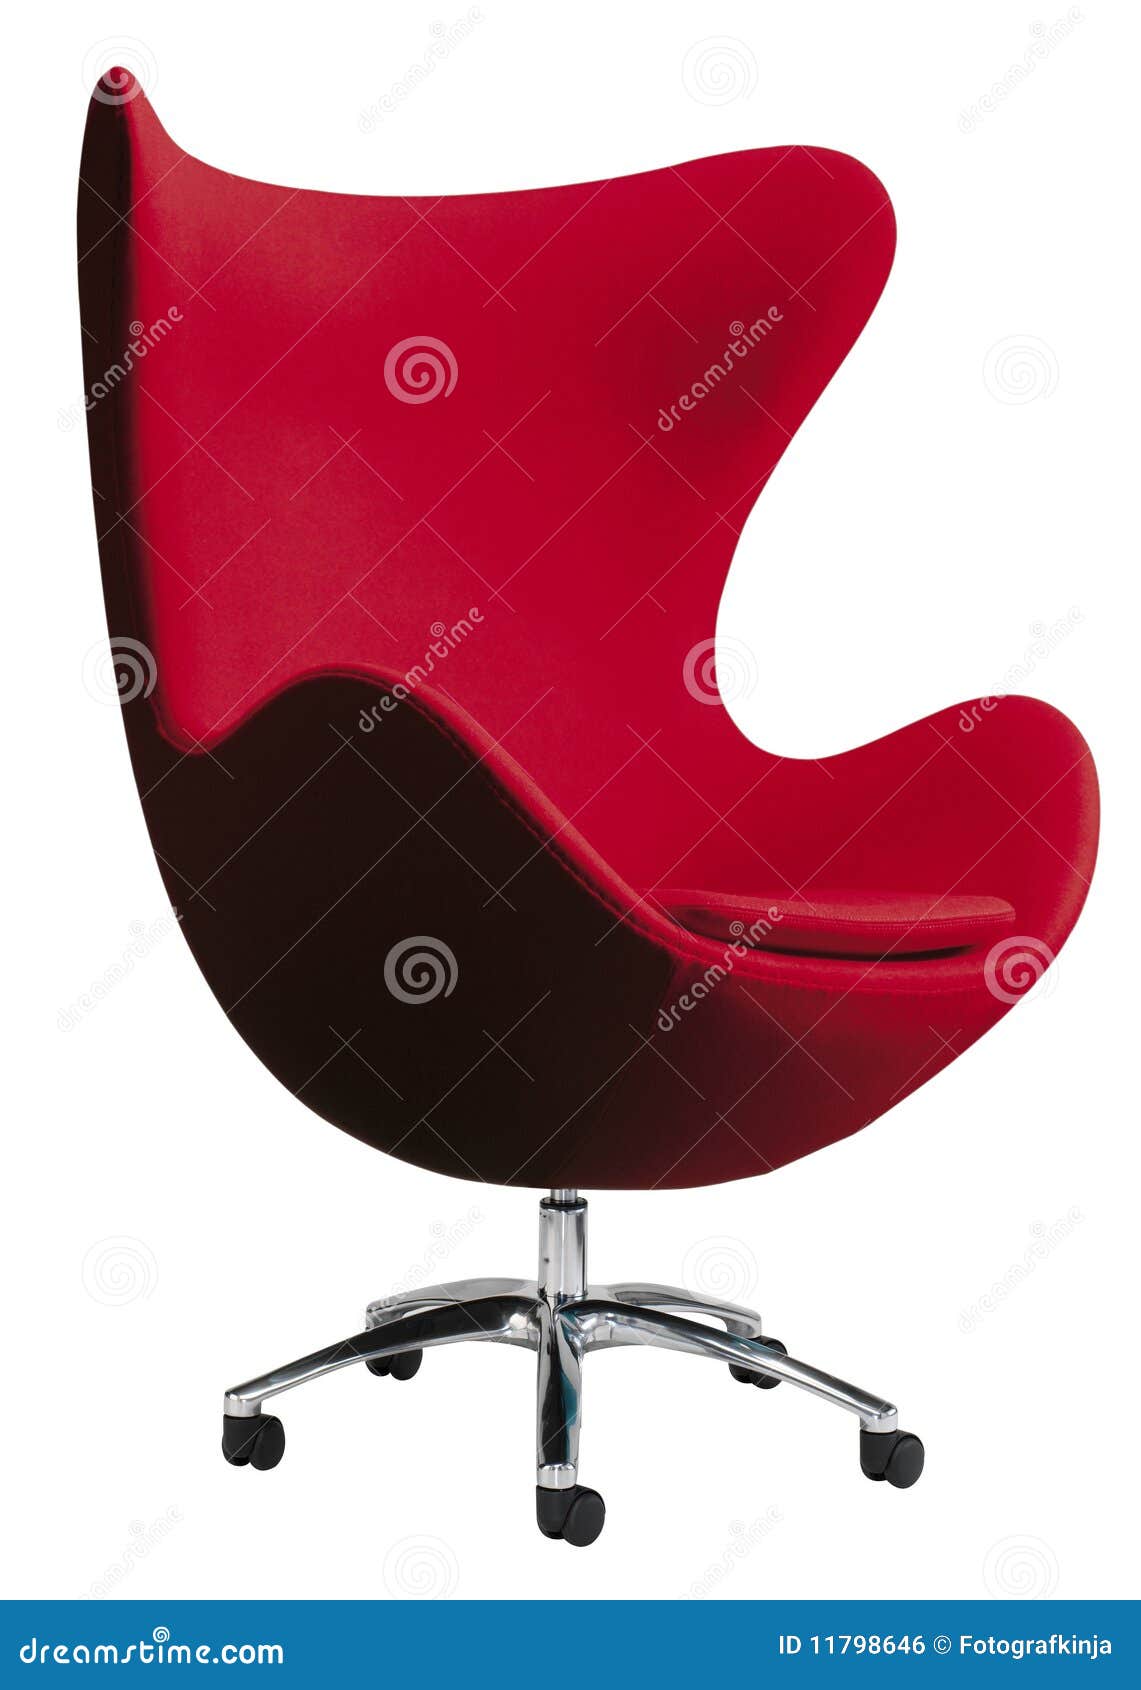 Red Egg Chair Royalty Free Stock Image - Image: 11798646